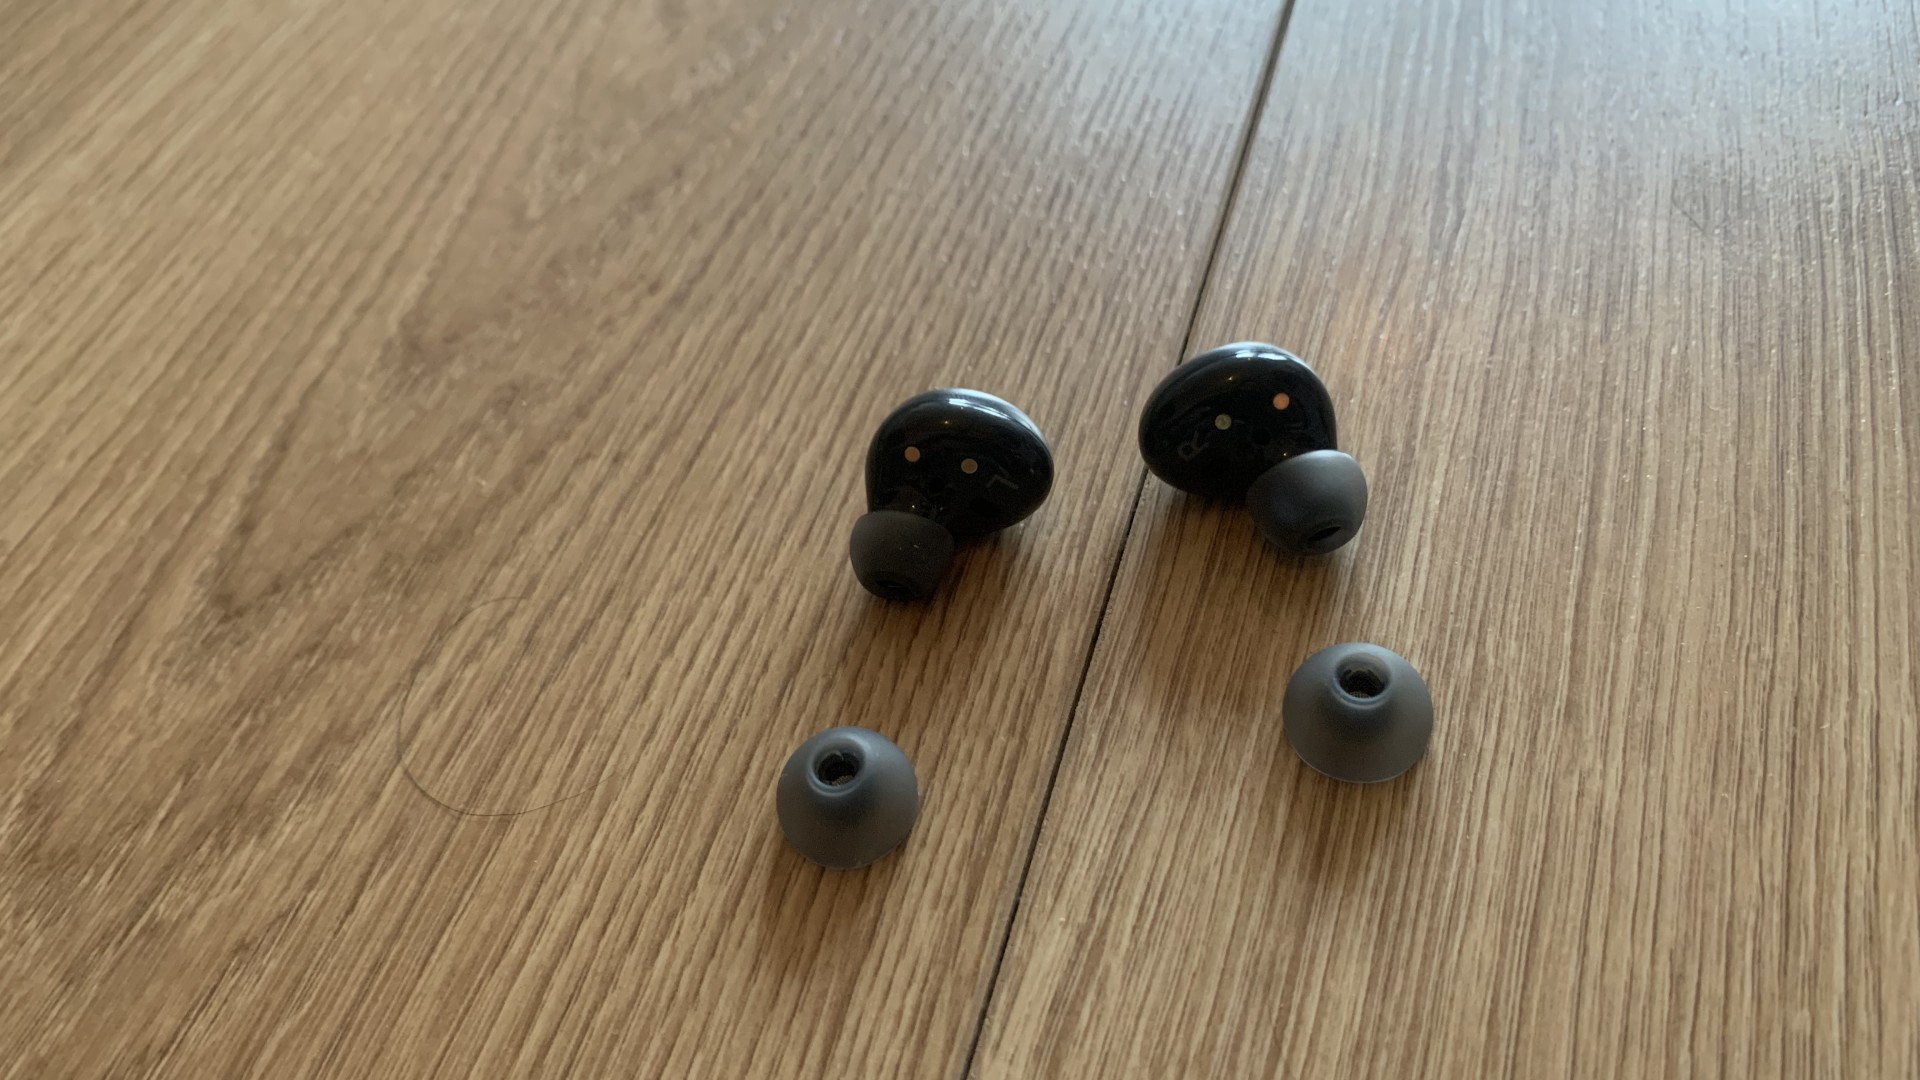 Samsung Galaxy Buds 2 being tested by Live Science